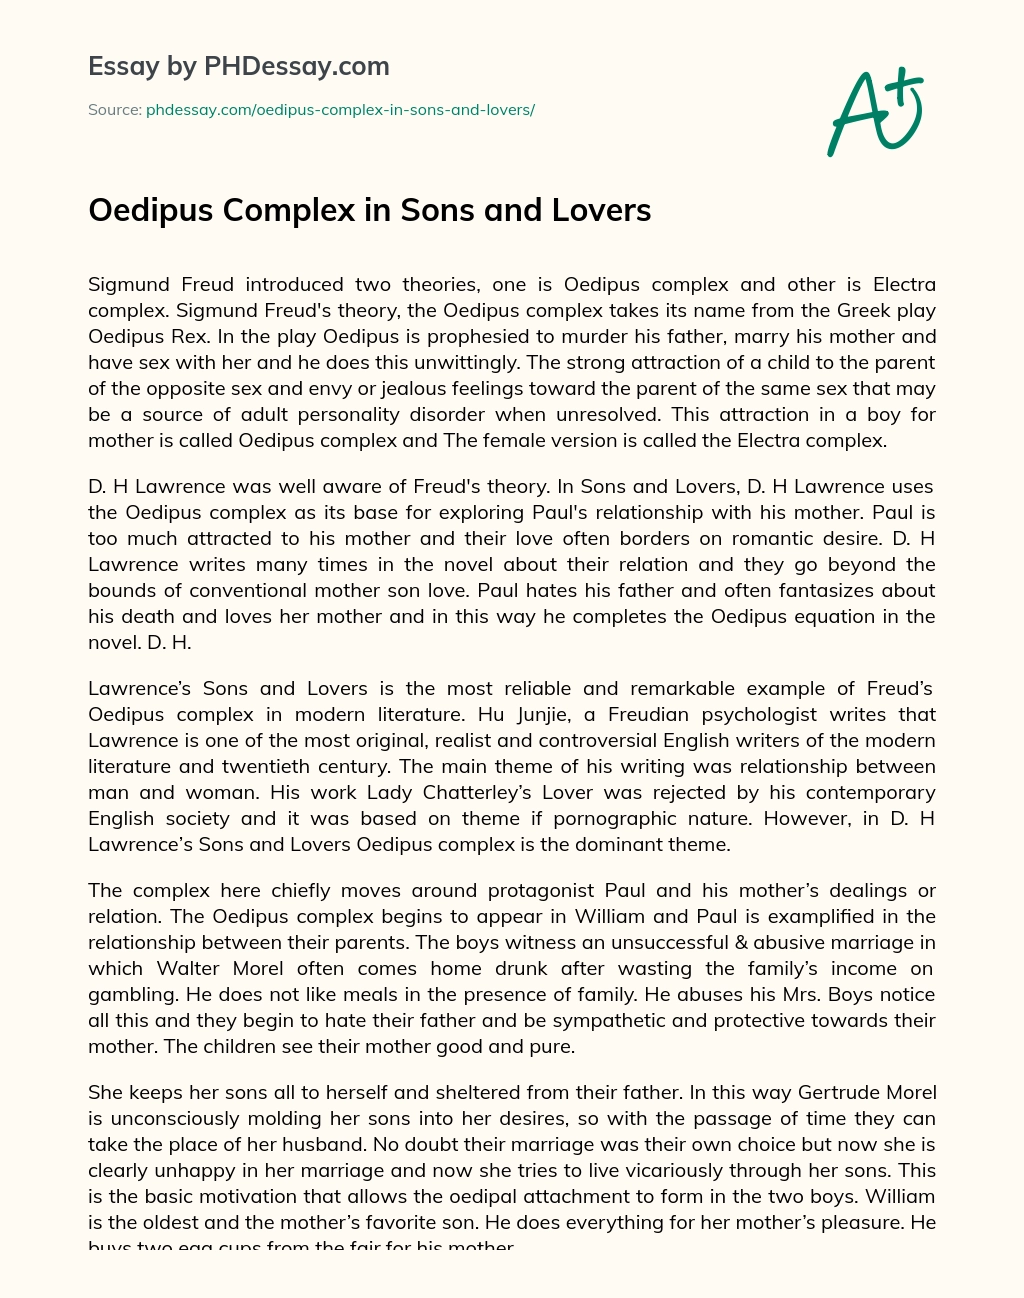 Oedipus Complex in Sons and Lovers essay